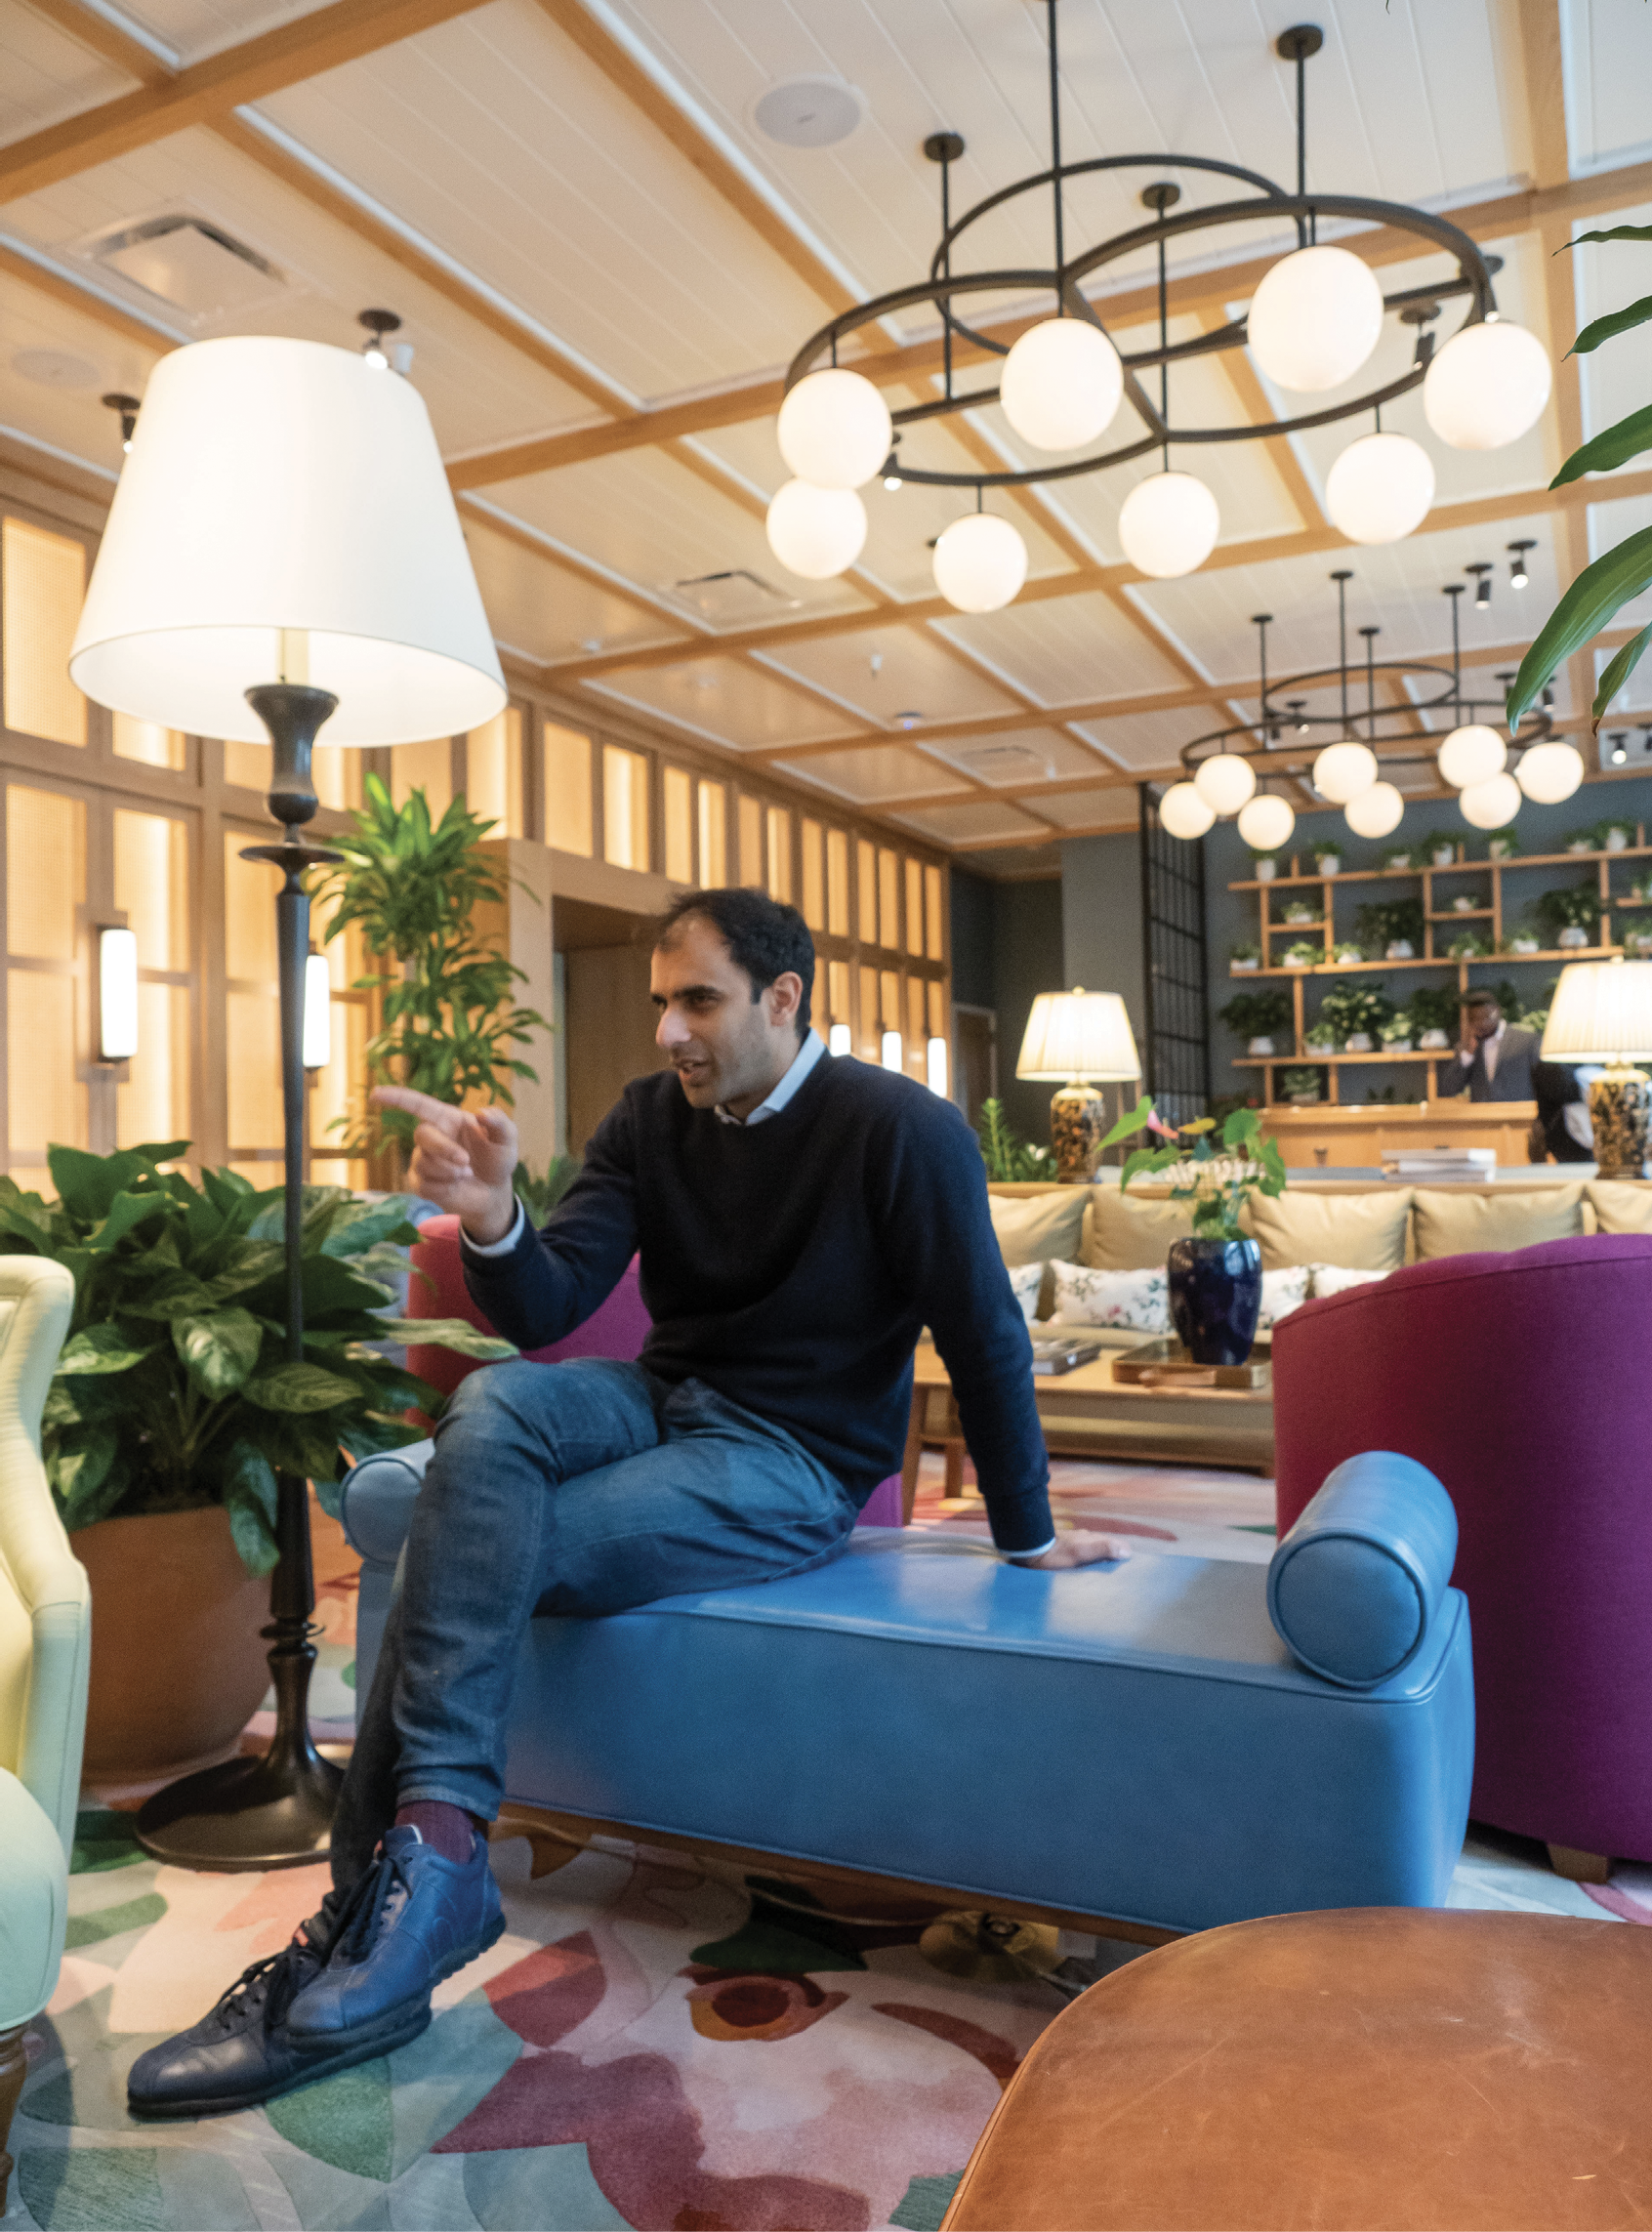 The Drayton Hotel opened in late fall 2019, the first property by hotelier Raghav Sapra.